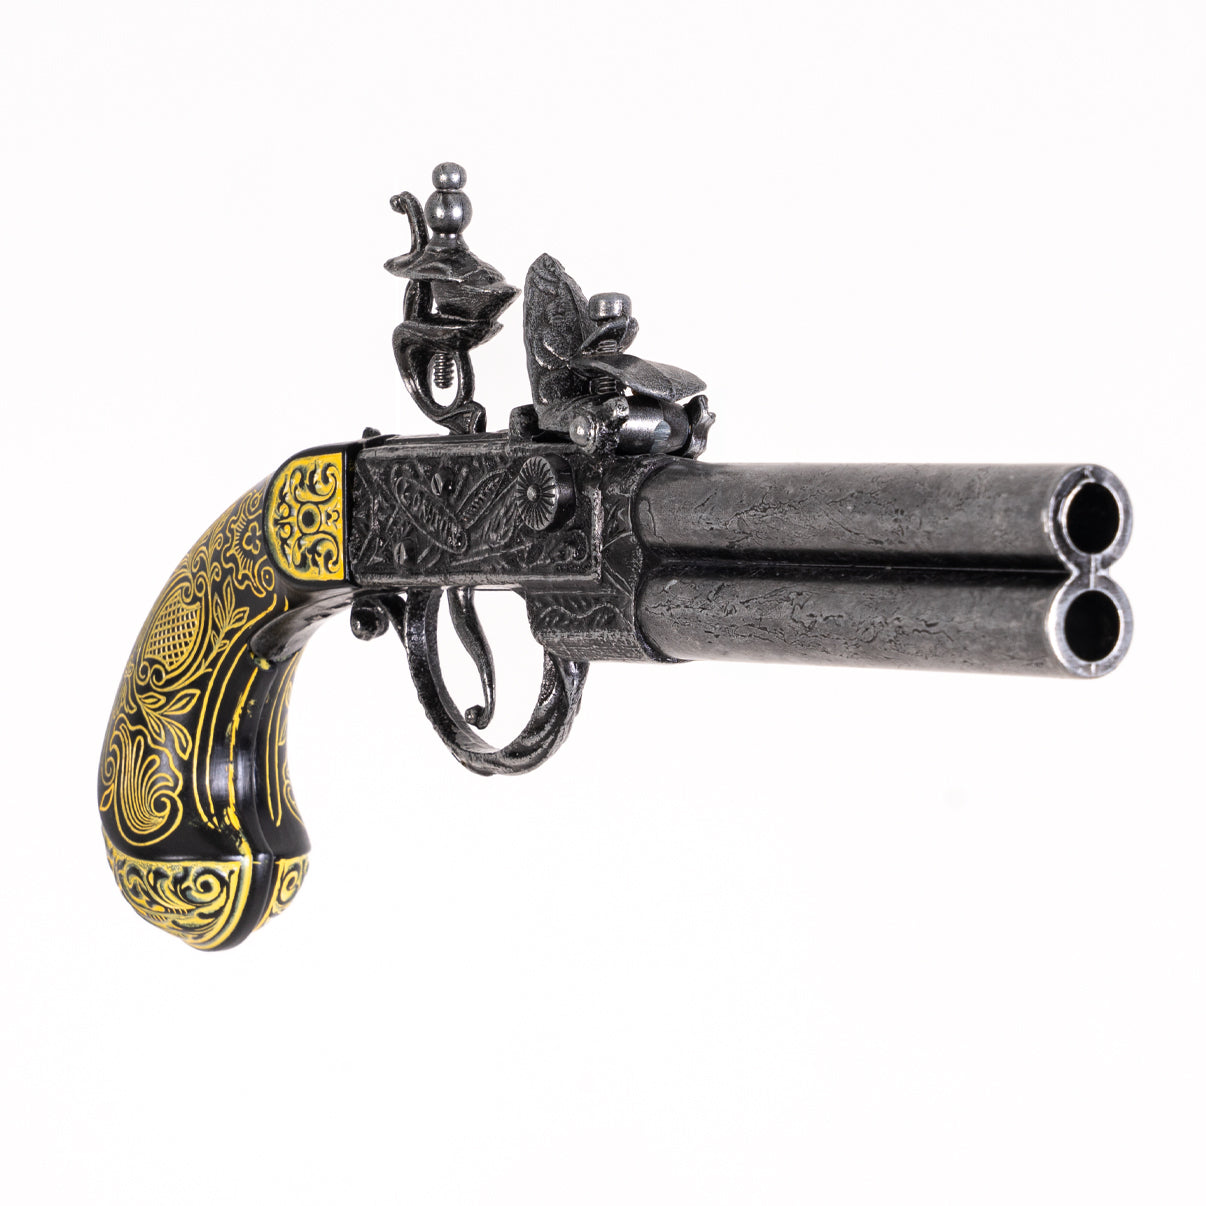 Front view of double barrels along with two flintlock mechanisms handle is beautifully etched as is silver pistol body